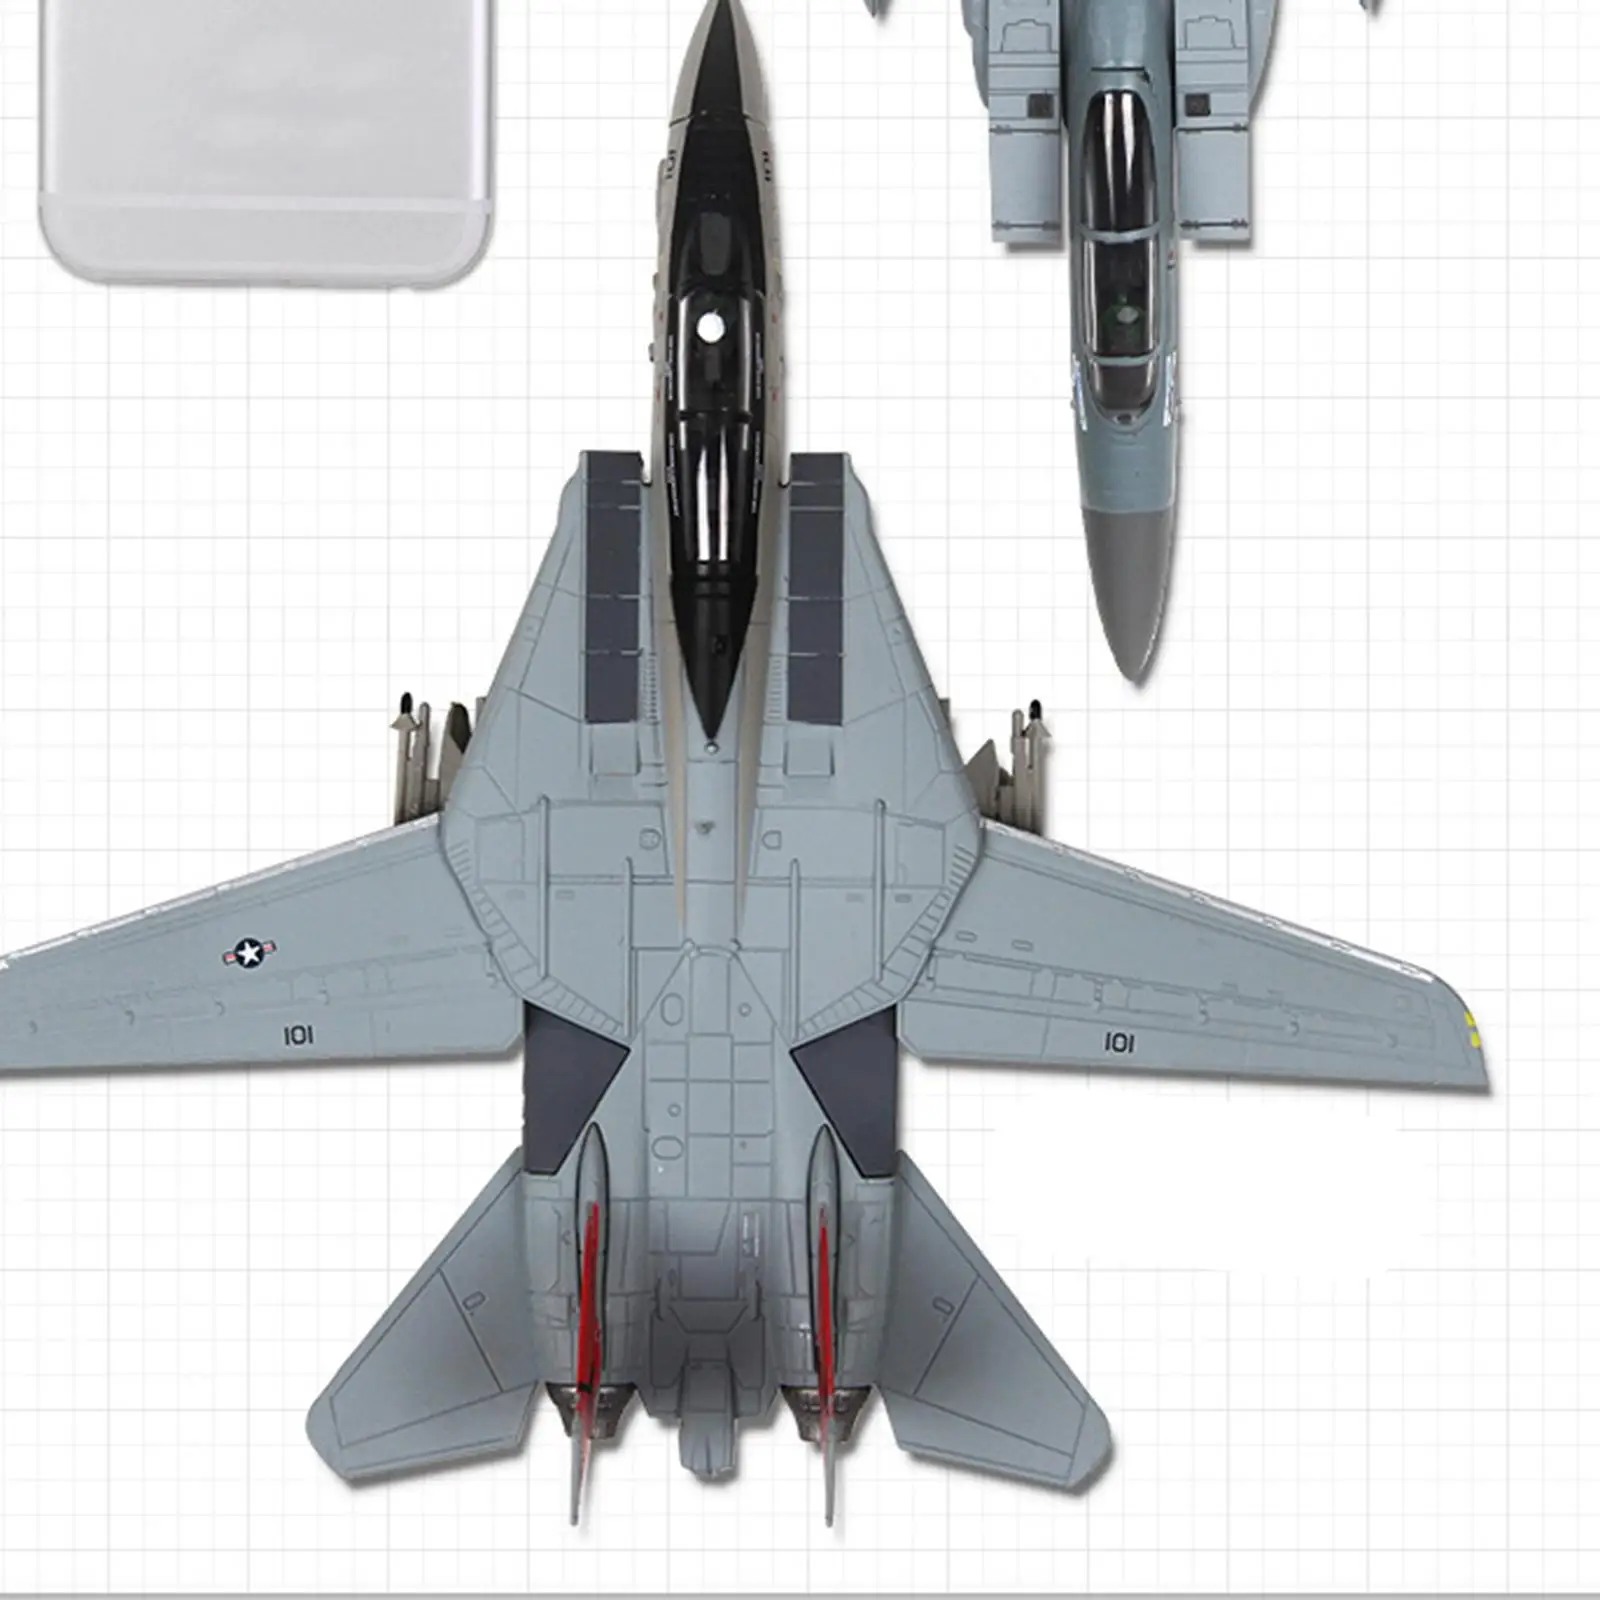 1:100 Scale F15 Aviation Model Collectibles Display, Toys for Teenagers